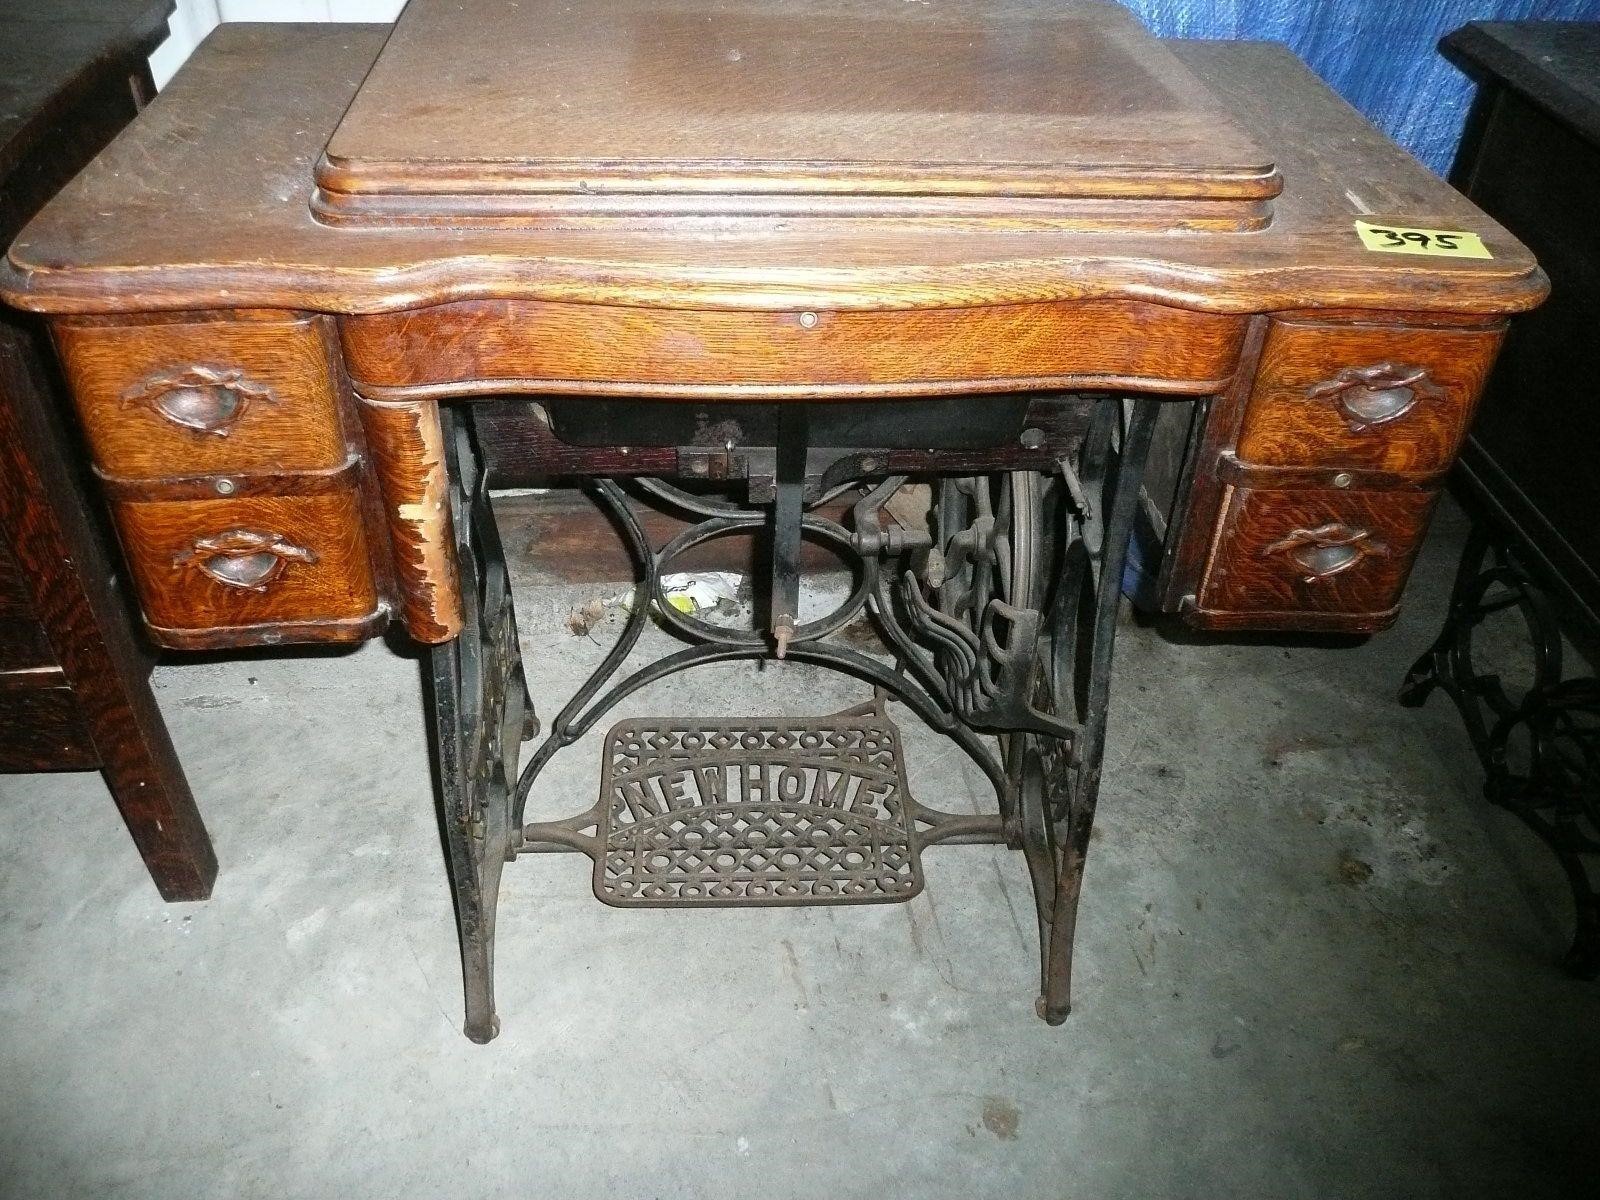 New Home Treadle Sewing Machine and Cabinet